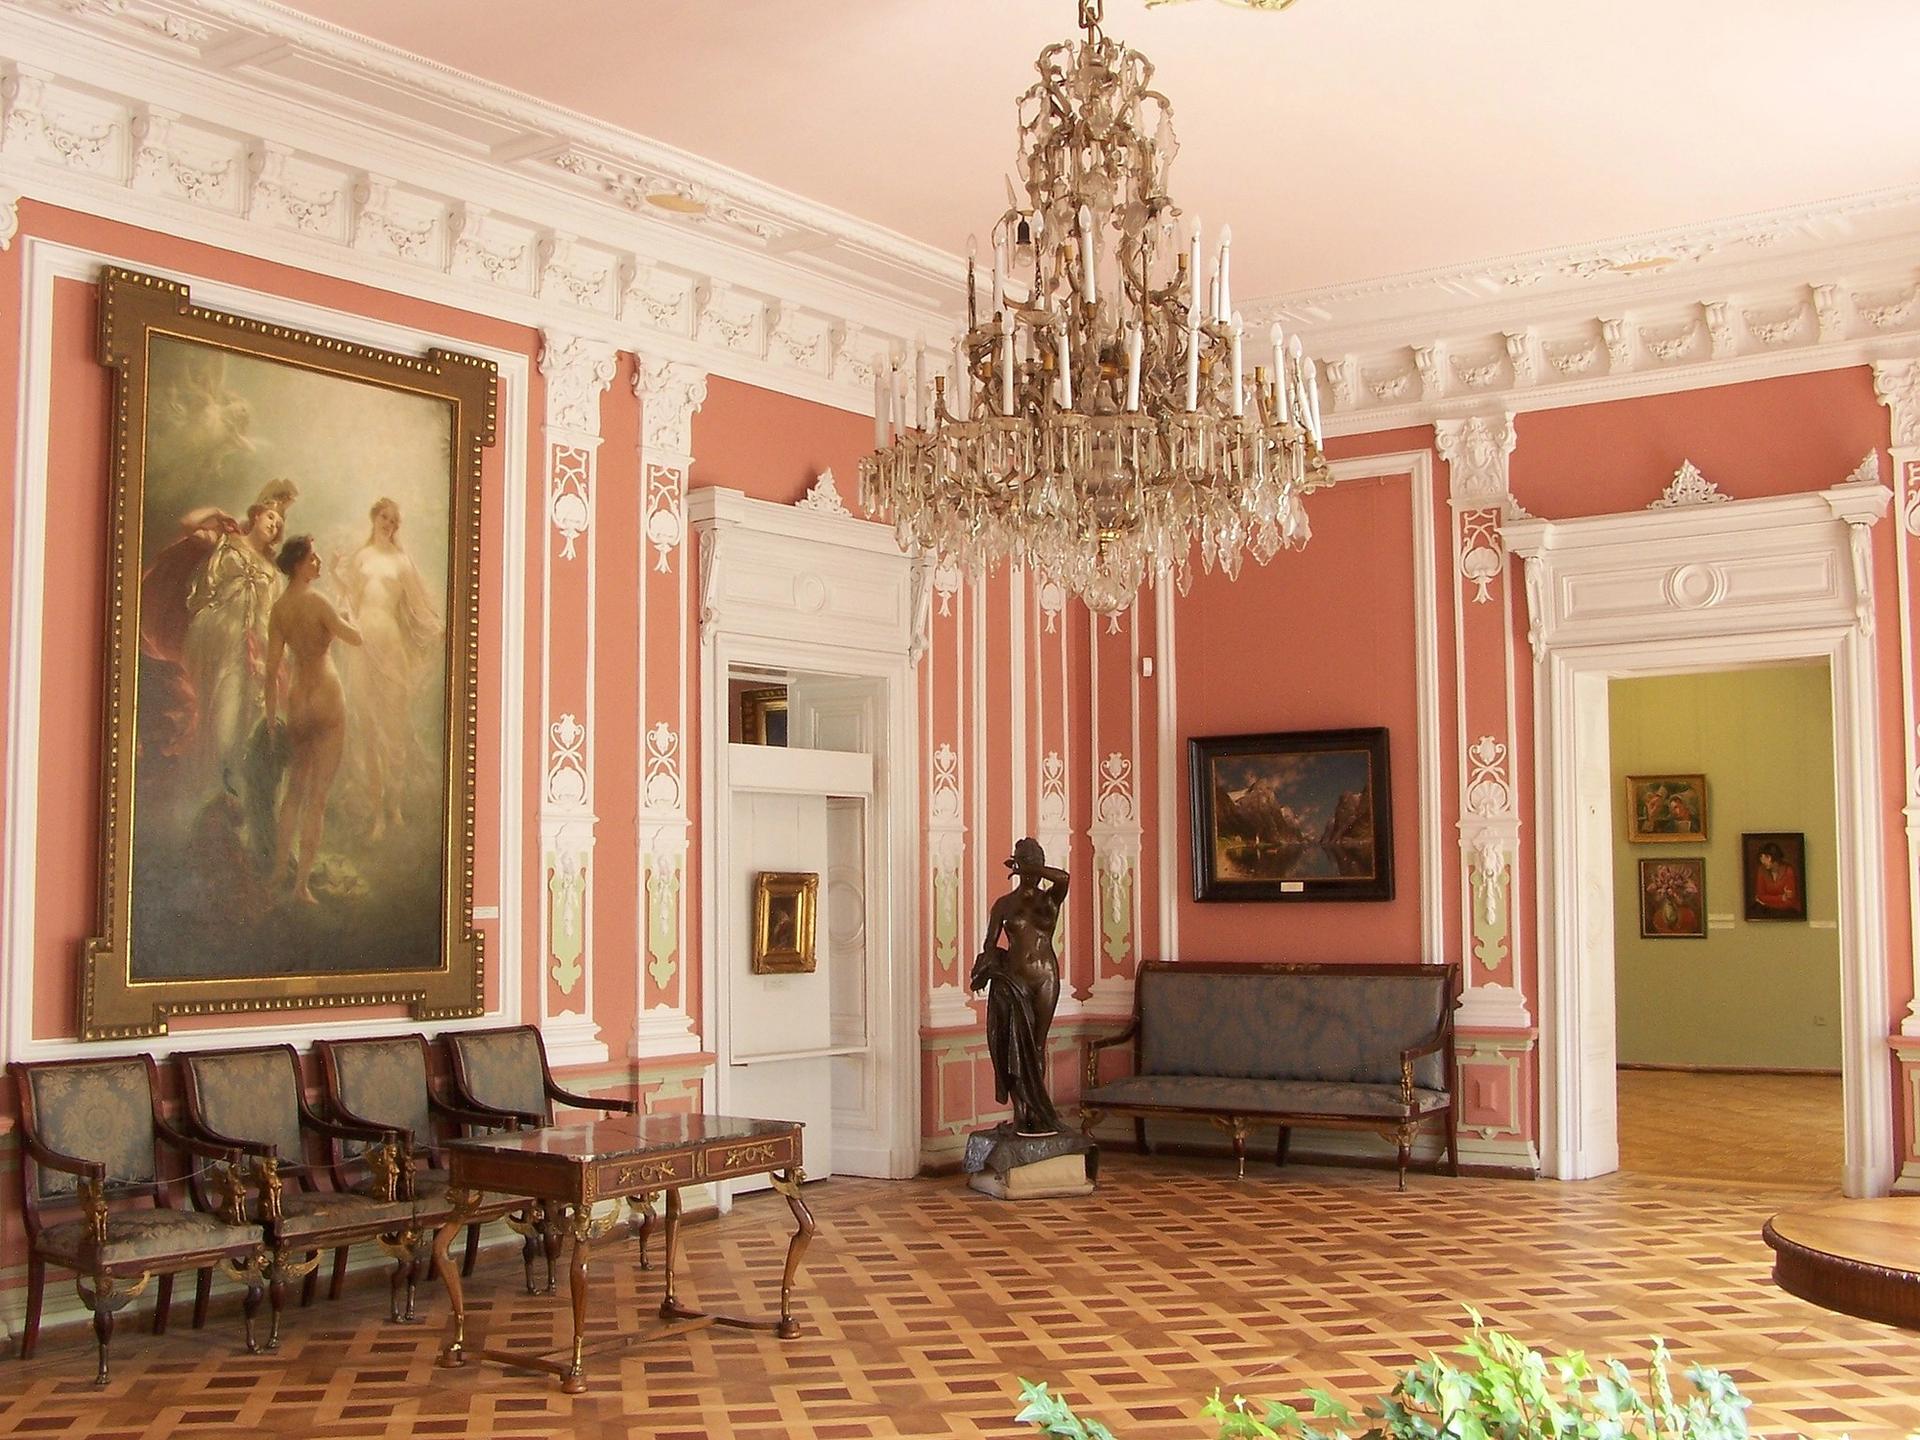 One of the rooms inside the Lviv National Art Gallery, Ukraine Photo: Lestat (Jan Mehlich)